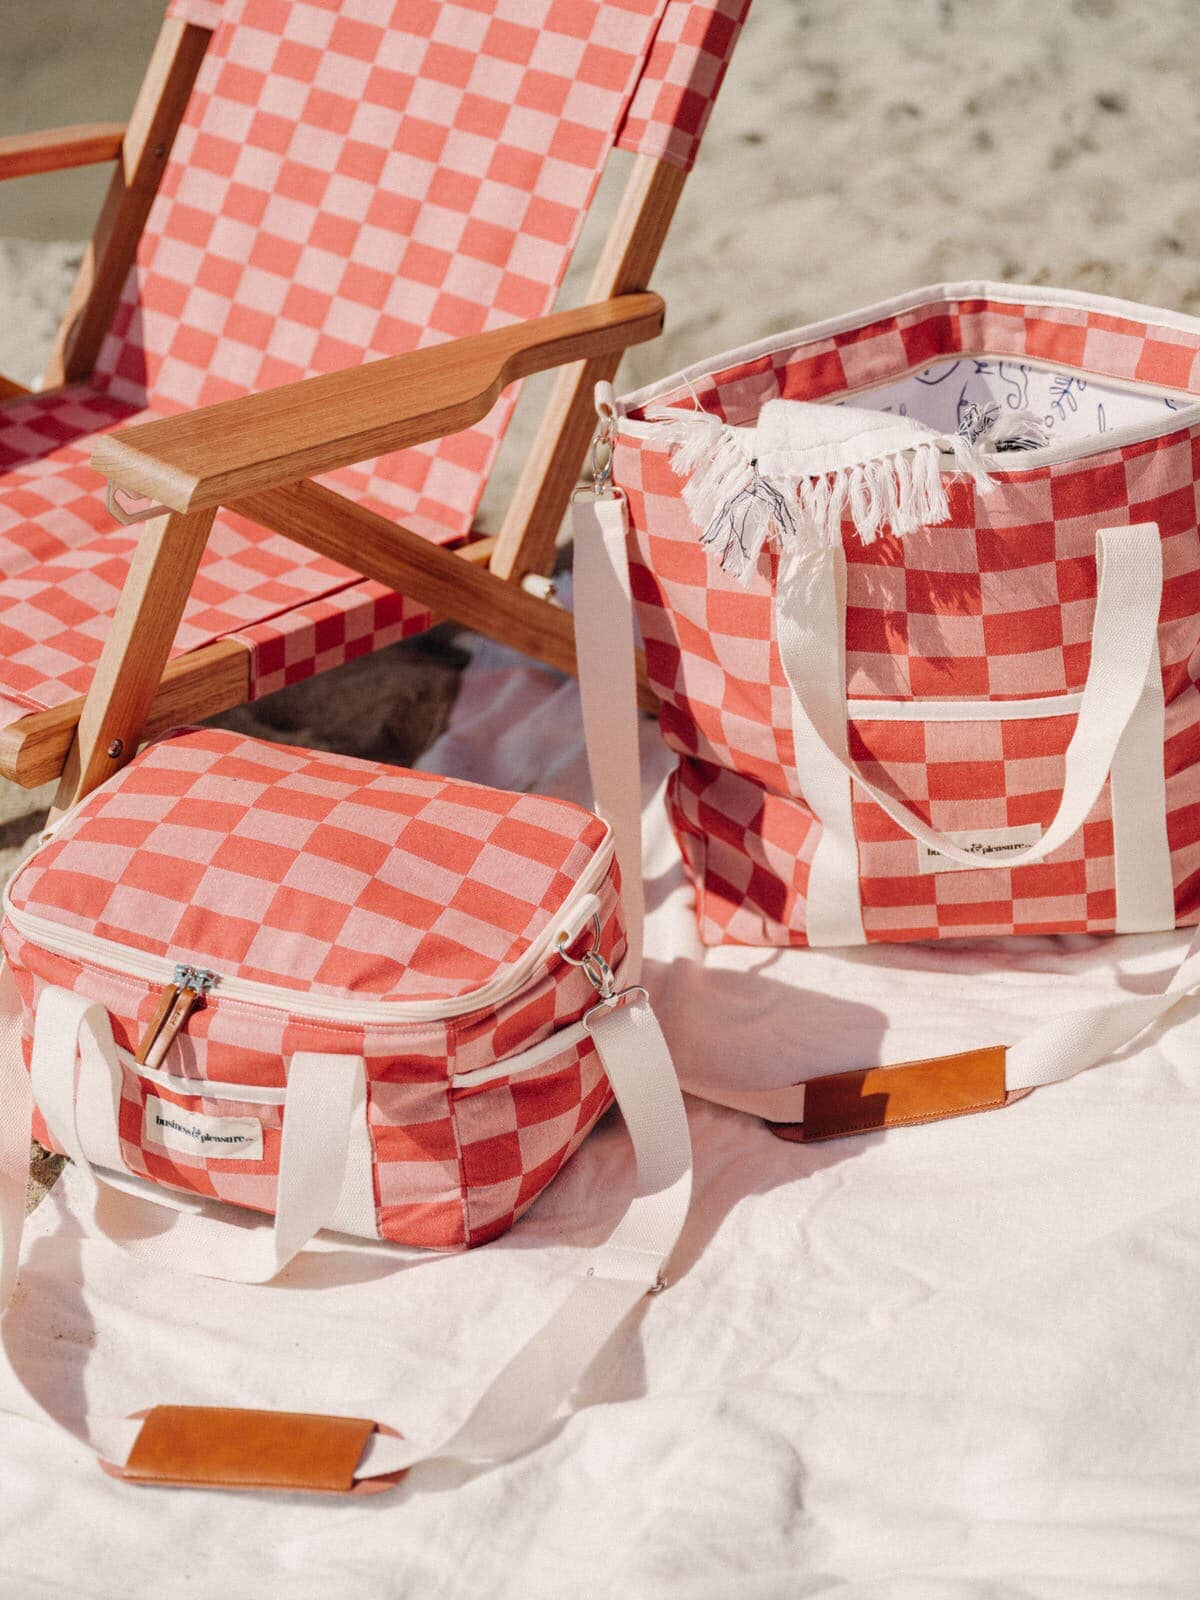 Beach picnic set up with le sirenuse check coolers and tommy chair